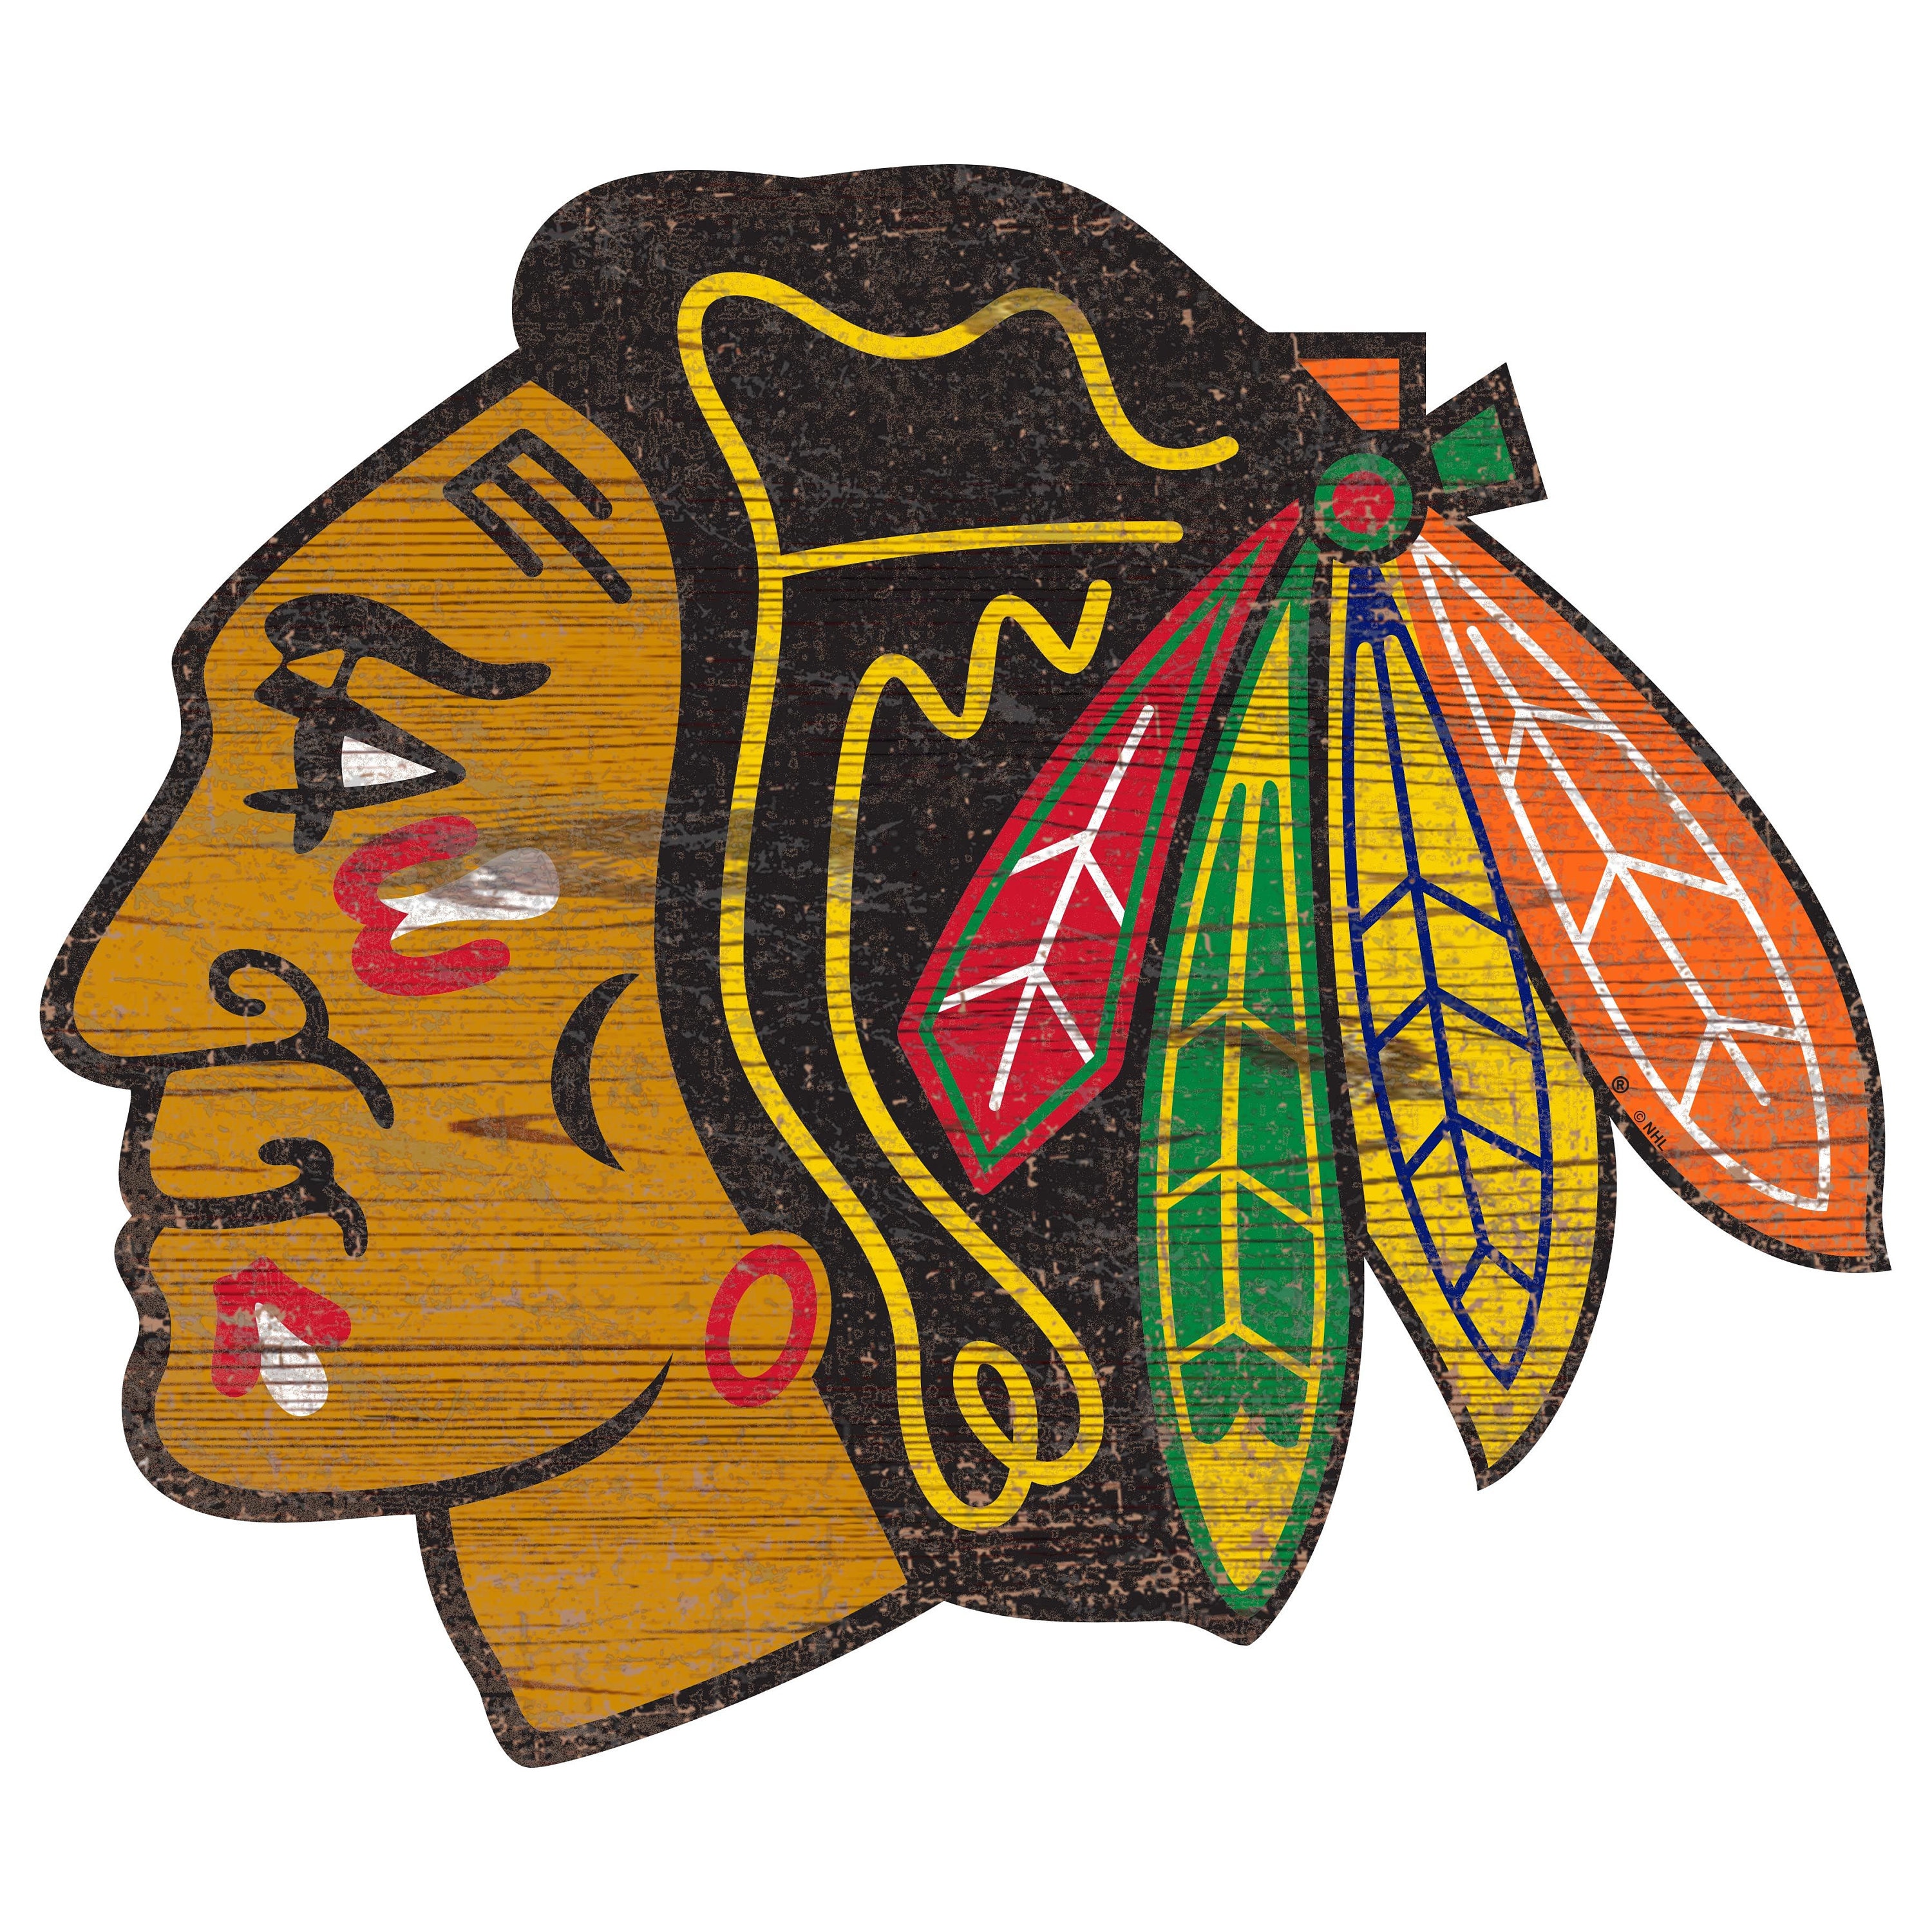 Chicago Blackhawks 2013 Stanley Cup Champions 8”x10” Wall Plaque